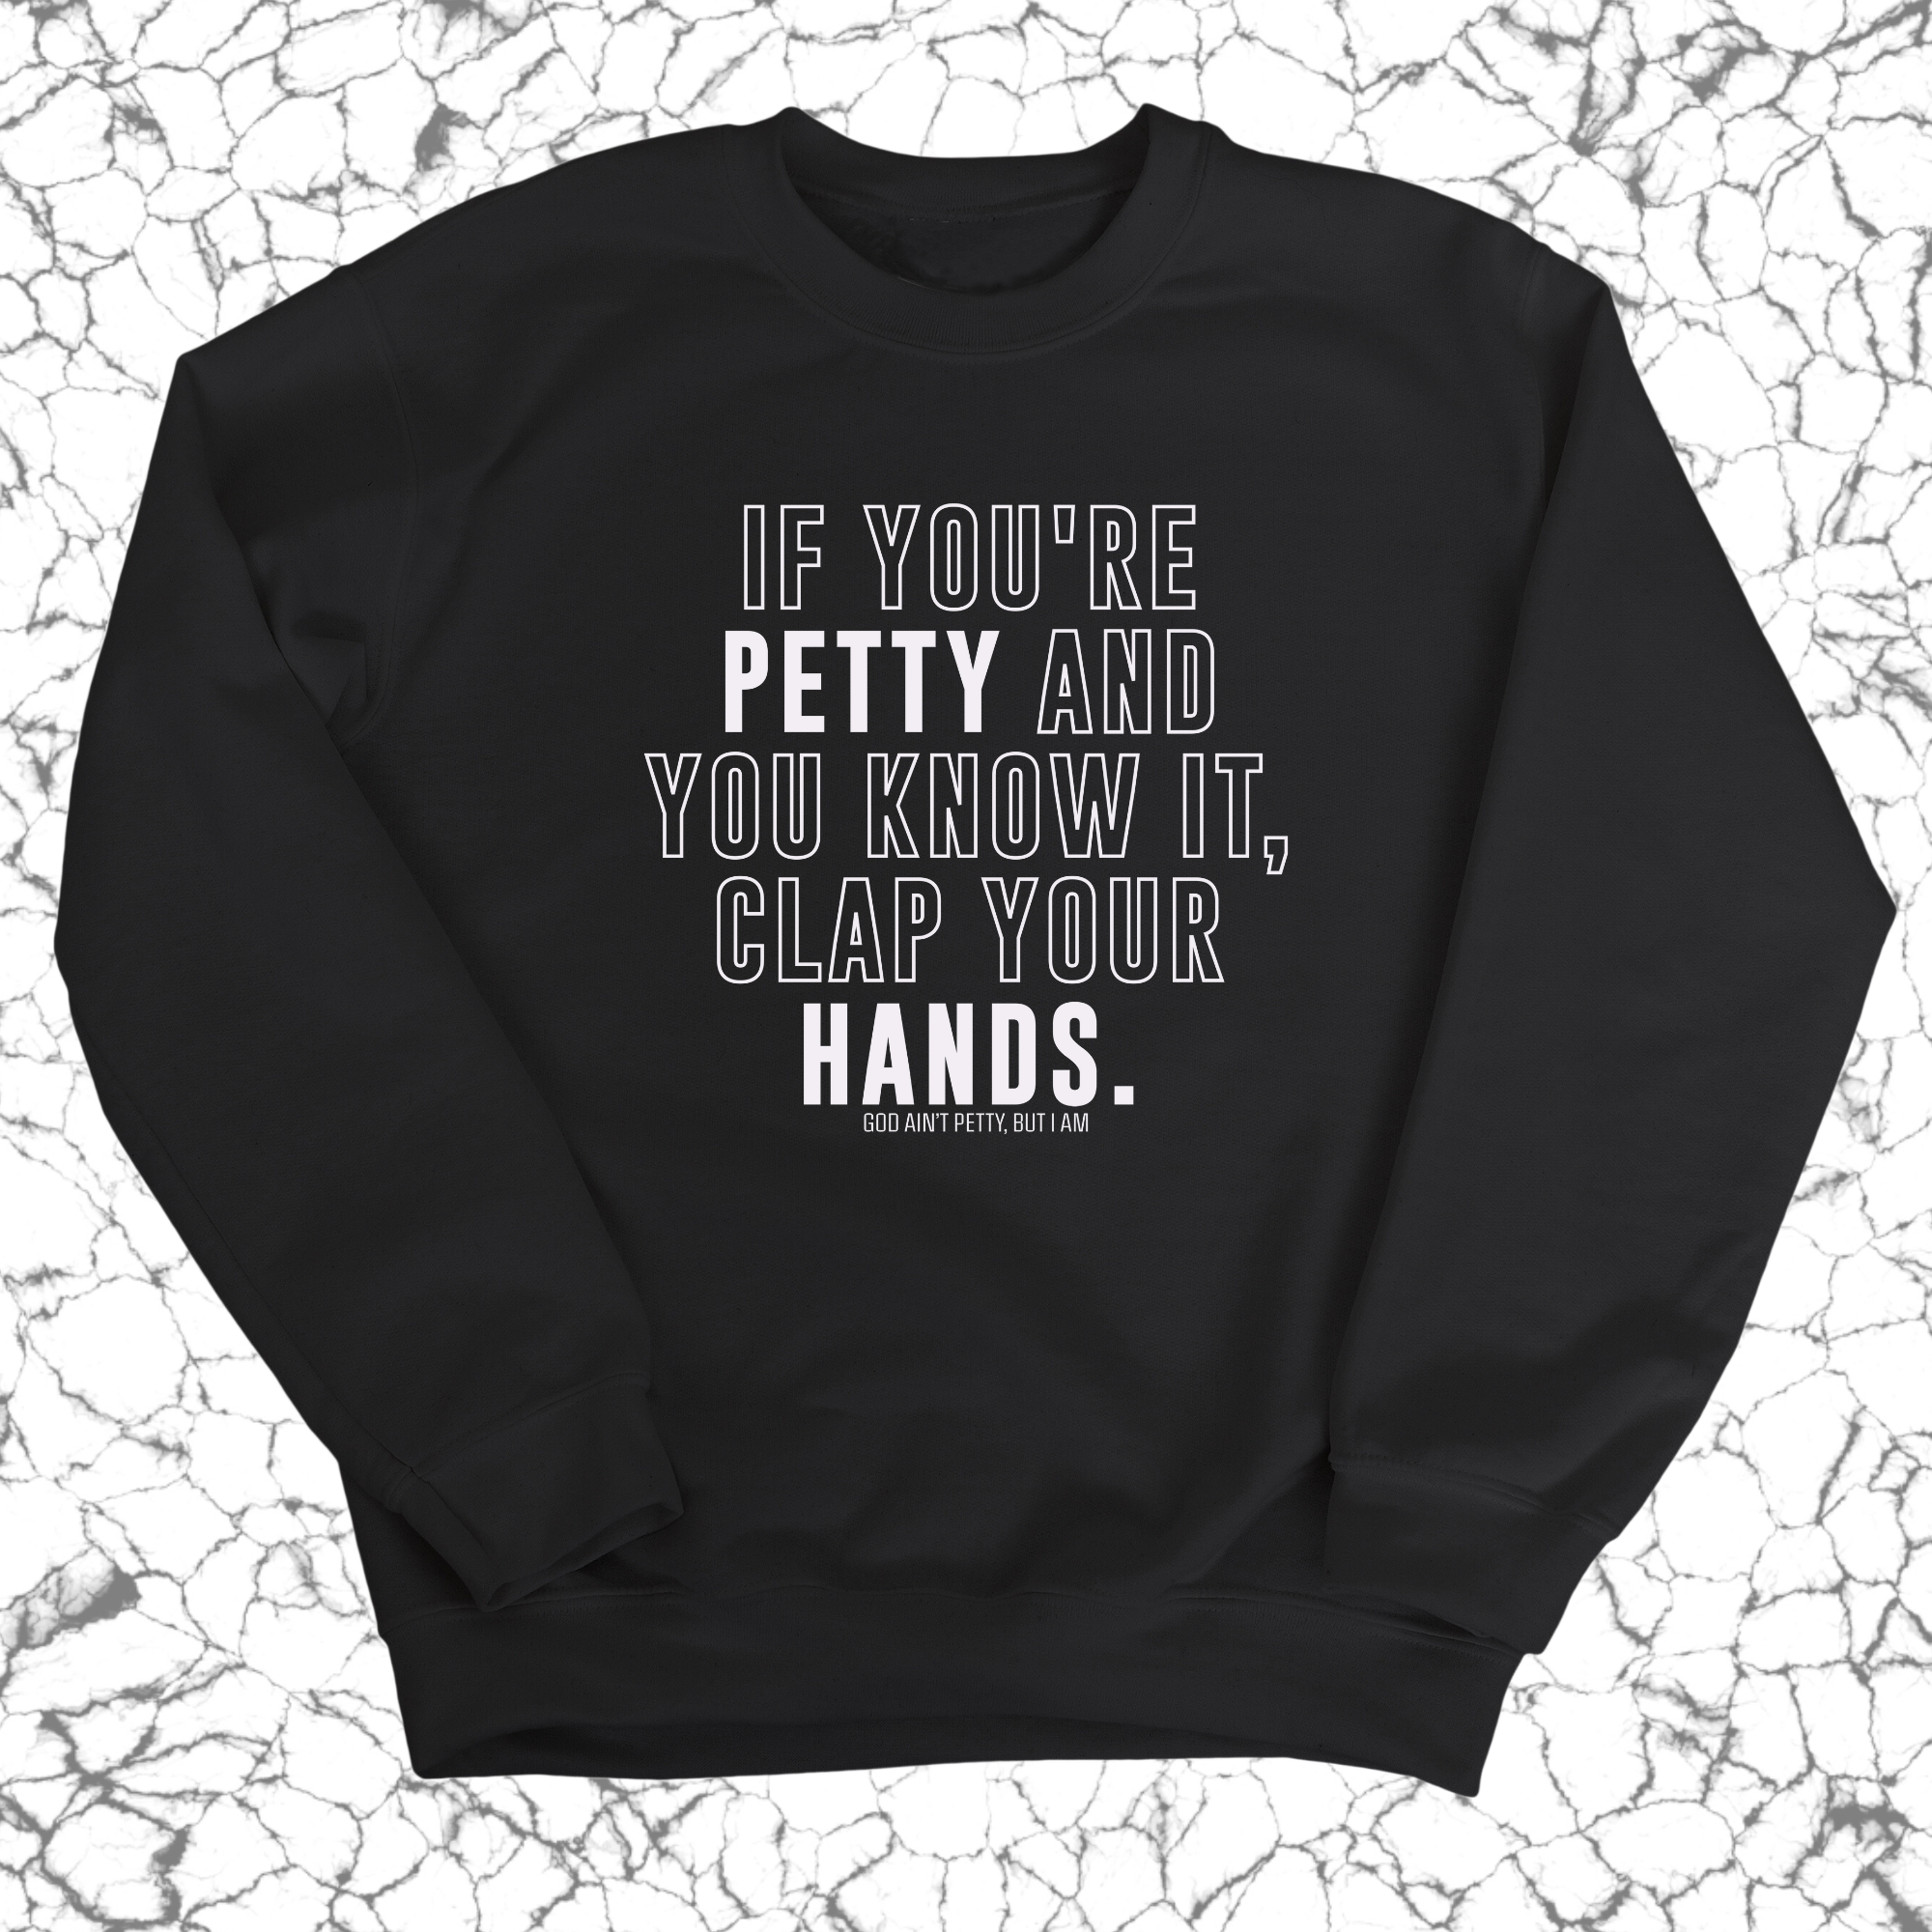 If you're Petty and you know it, Clap your hands Unisex Sweatshirt-Sweatshirt-The Original God Ain't Petty But I Am